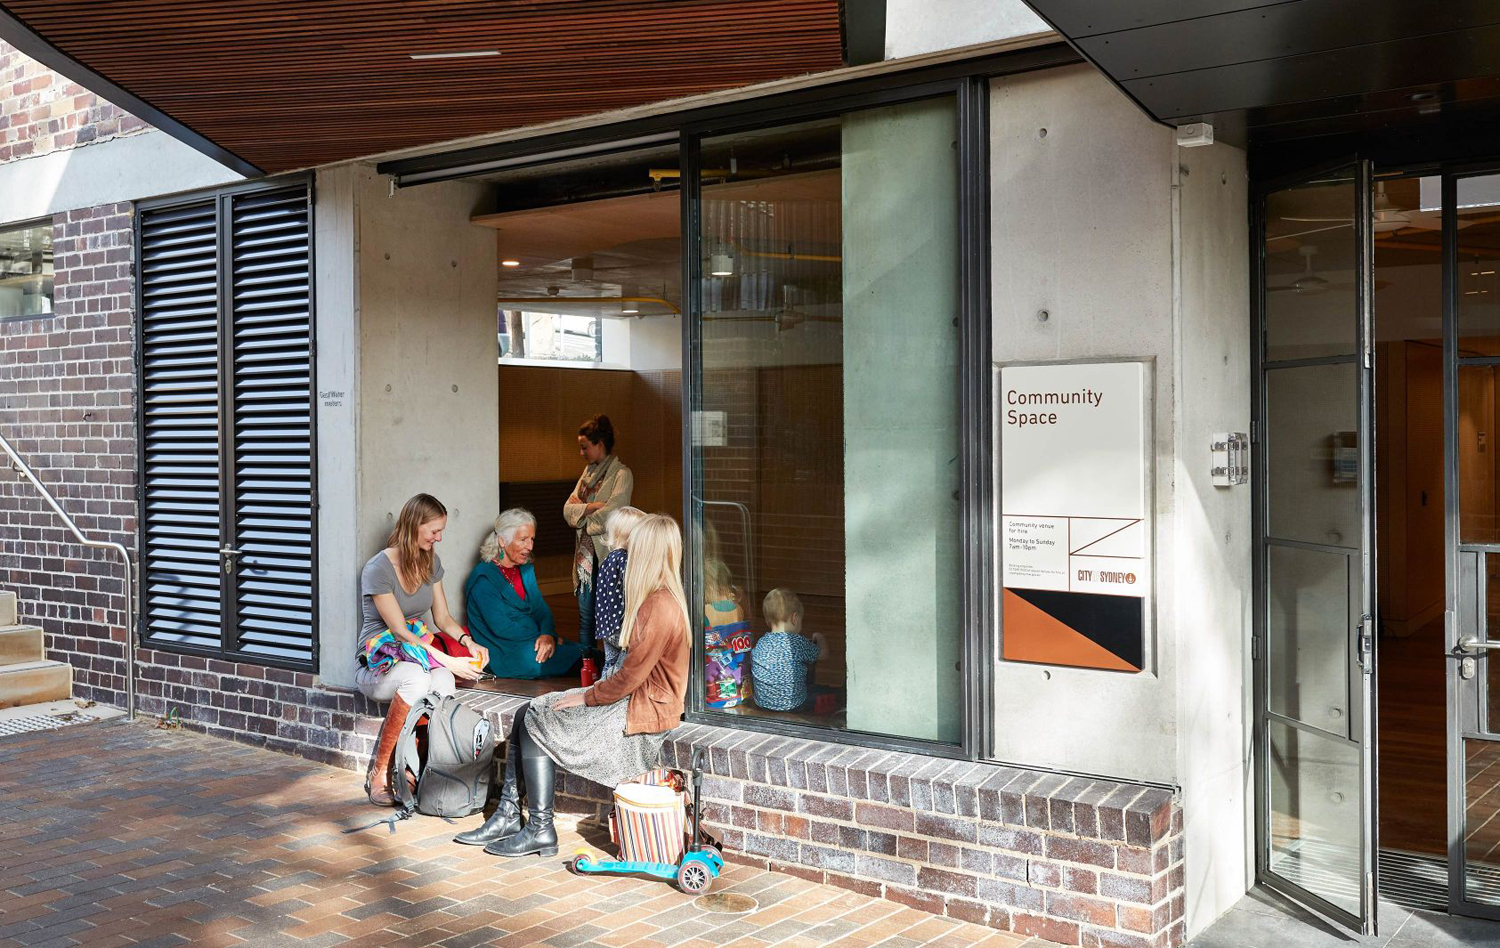 Signage and wayfinding designed by graphic design studio Toko for East Sydney Early Learning & Community Centre